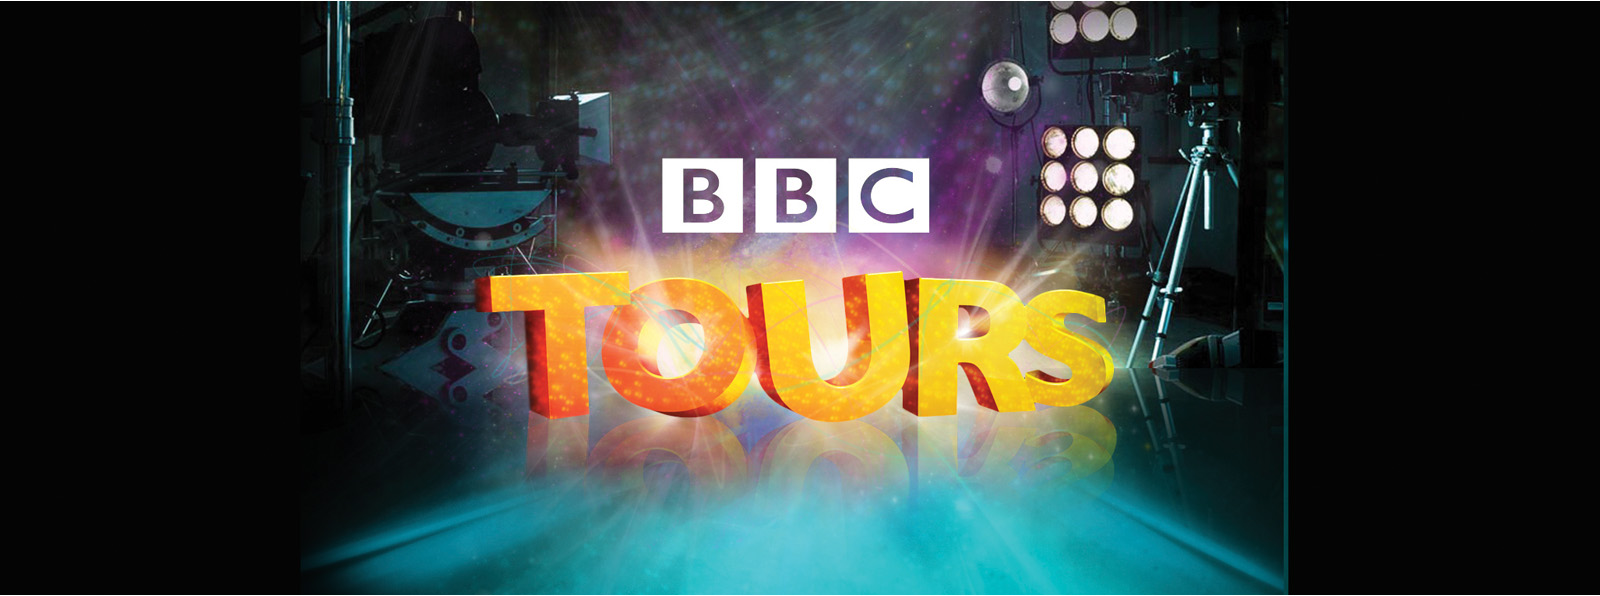 bbc shows and tours twitter